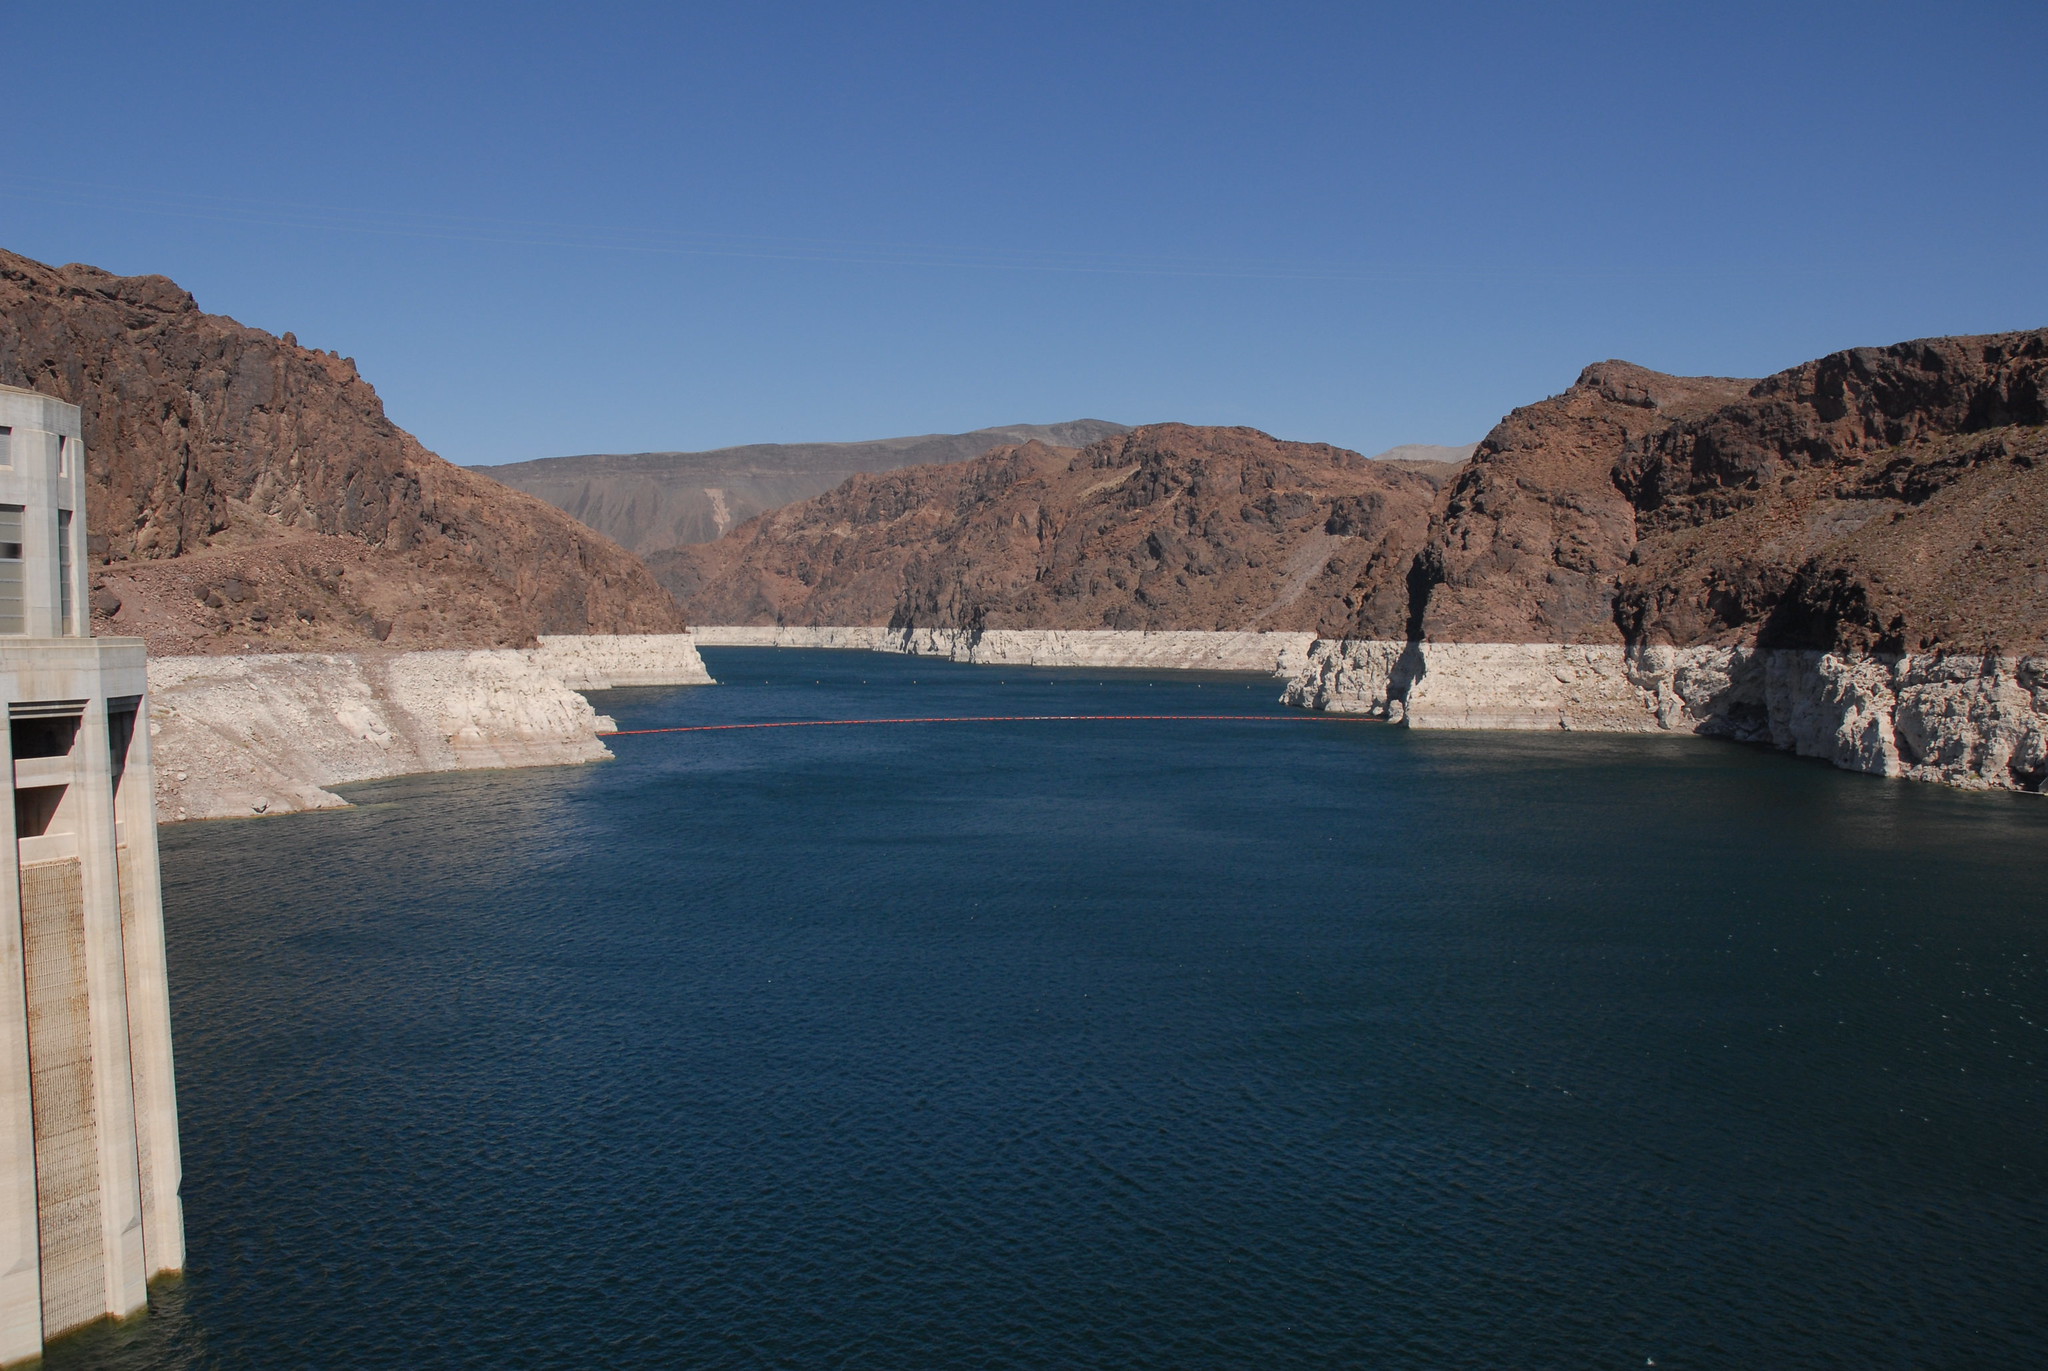 A view of the Colorado rover from the Hoover Dam